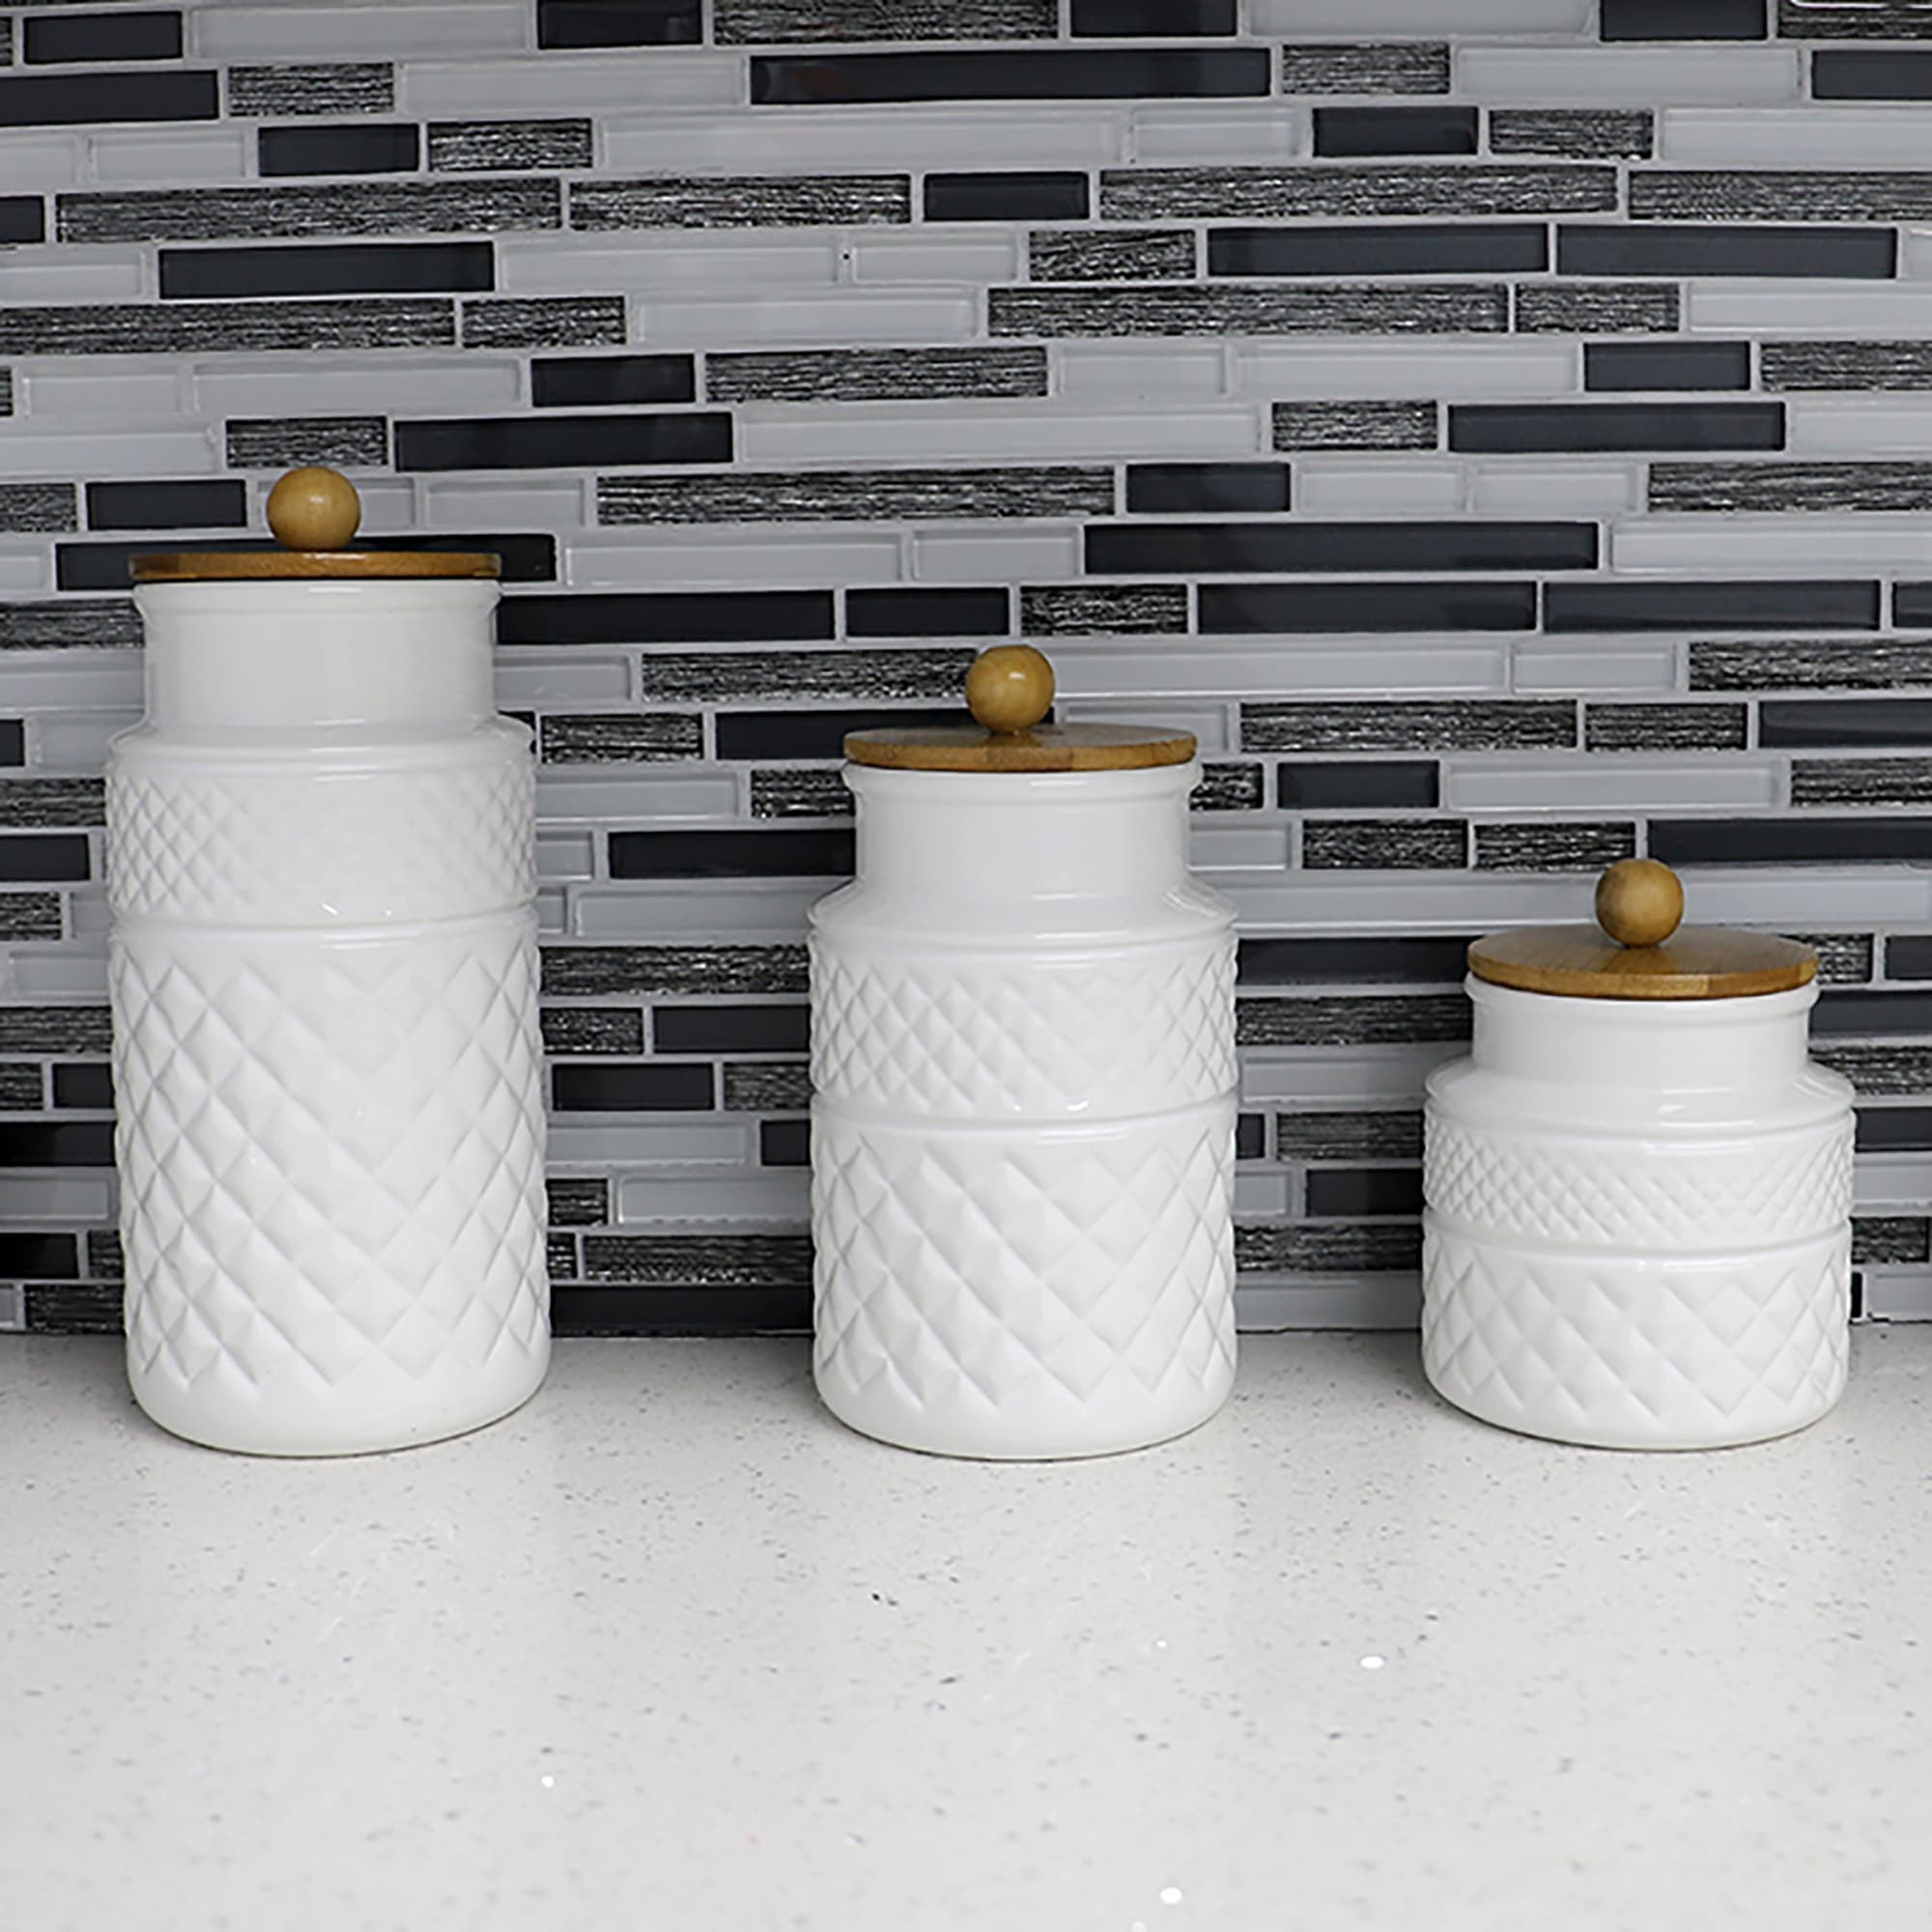 Home Basics 3 Piece Embossed Ceramic Canister with Bamboo Tops, White $20 EACH, CASE PACK OF 2